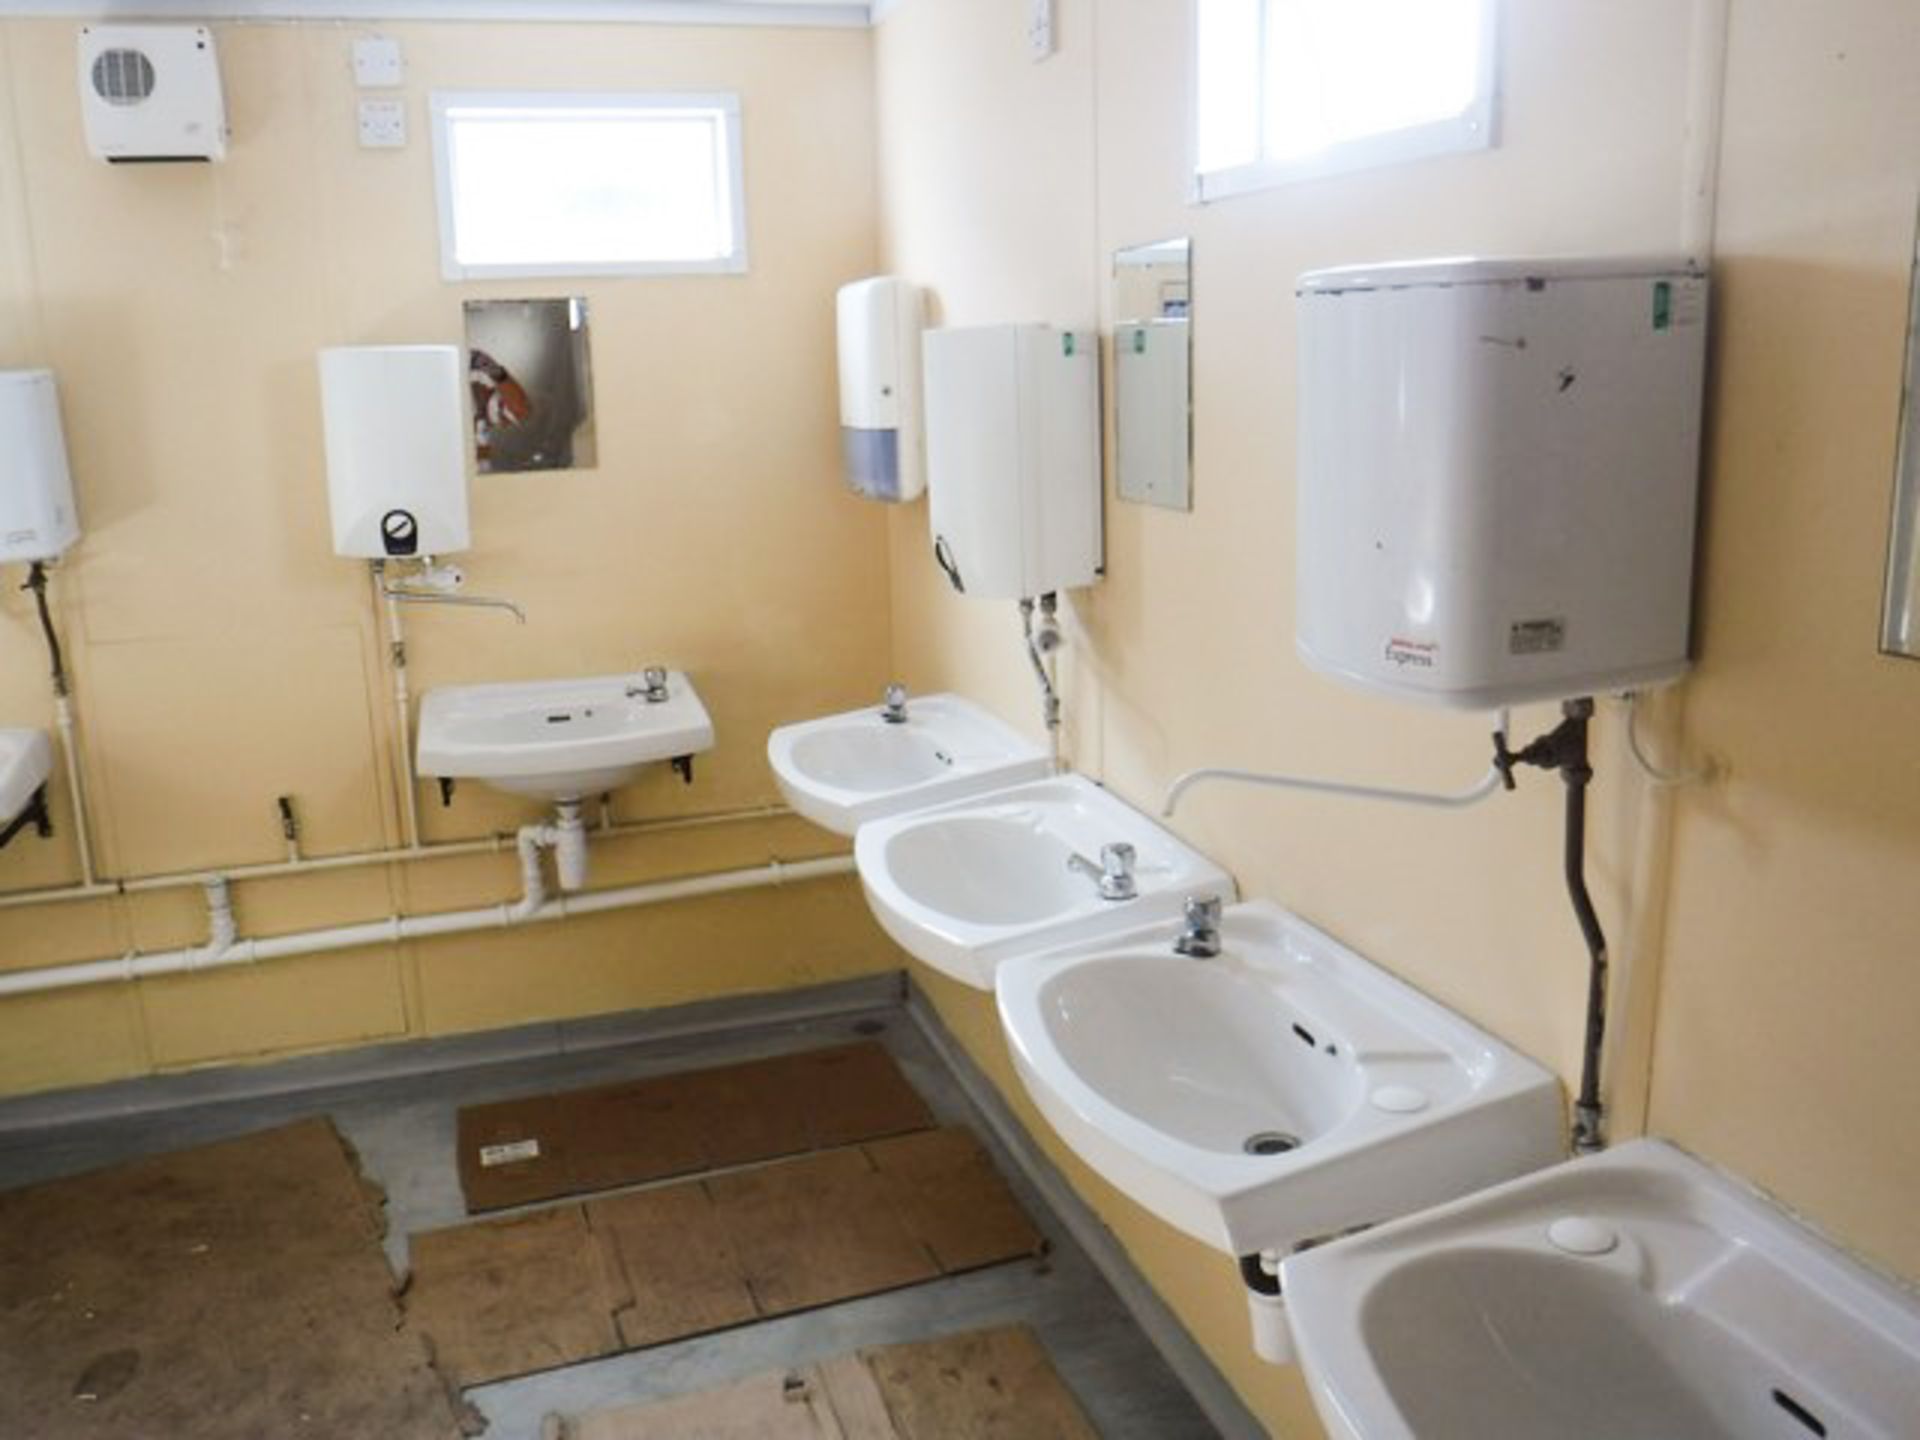 40 X 10 TOILET BLOCK, C/W 10 CUBICALS, 10 URINALS, 9 SINKS, WATER HEATERS TEMP CONTROLLED ANTI-FREEZ - Image 6 of 9